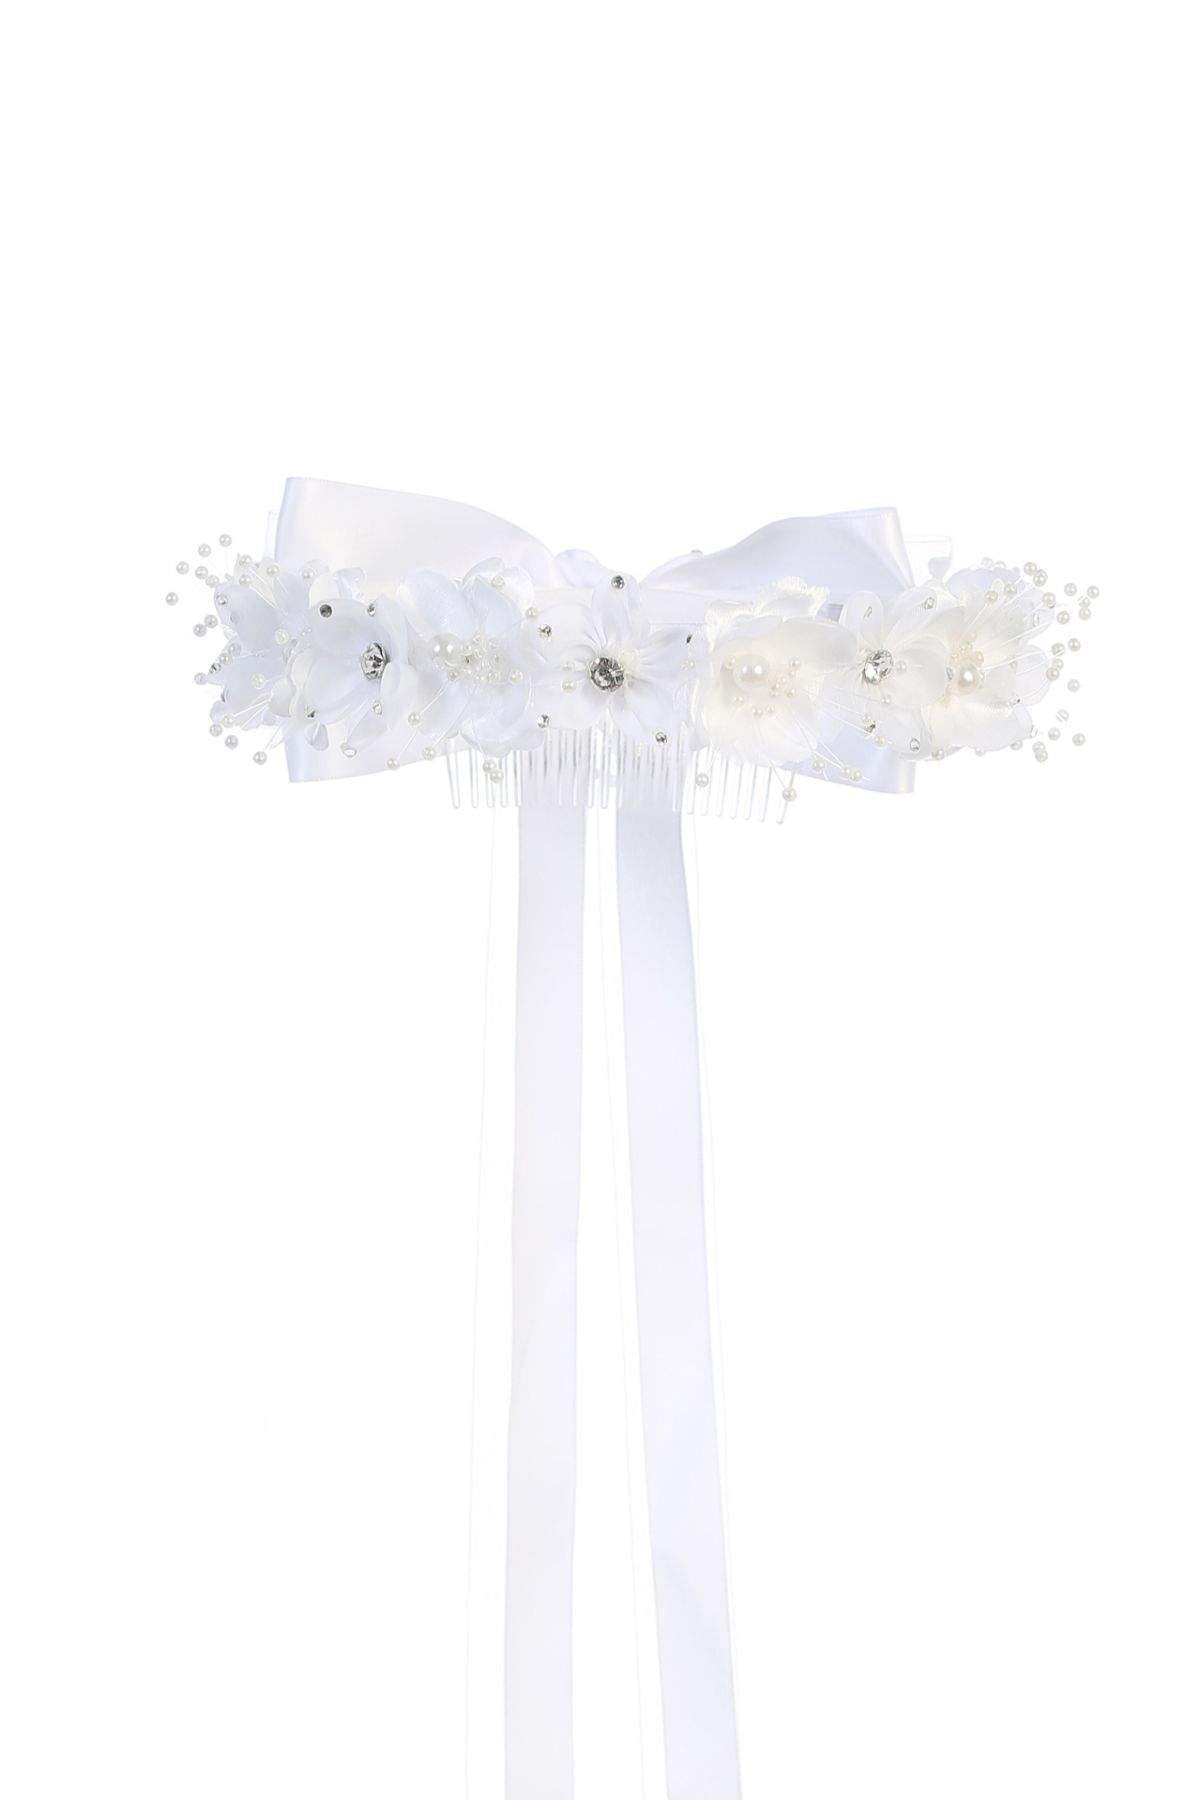 Gem Pearl Flower Crown-Kid's Dream-1_2,3_4,5_6,7_8,big_girl,color_White,fabric_Satin,little_girl,size_02,size_04,size_06,size_08,size_10,size_12,size_14